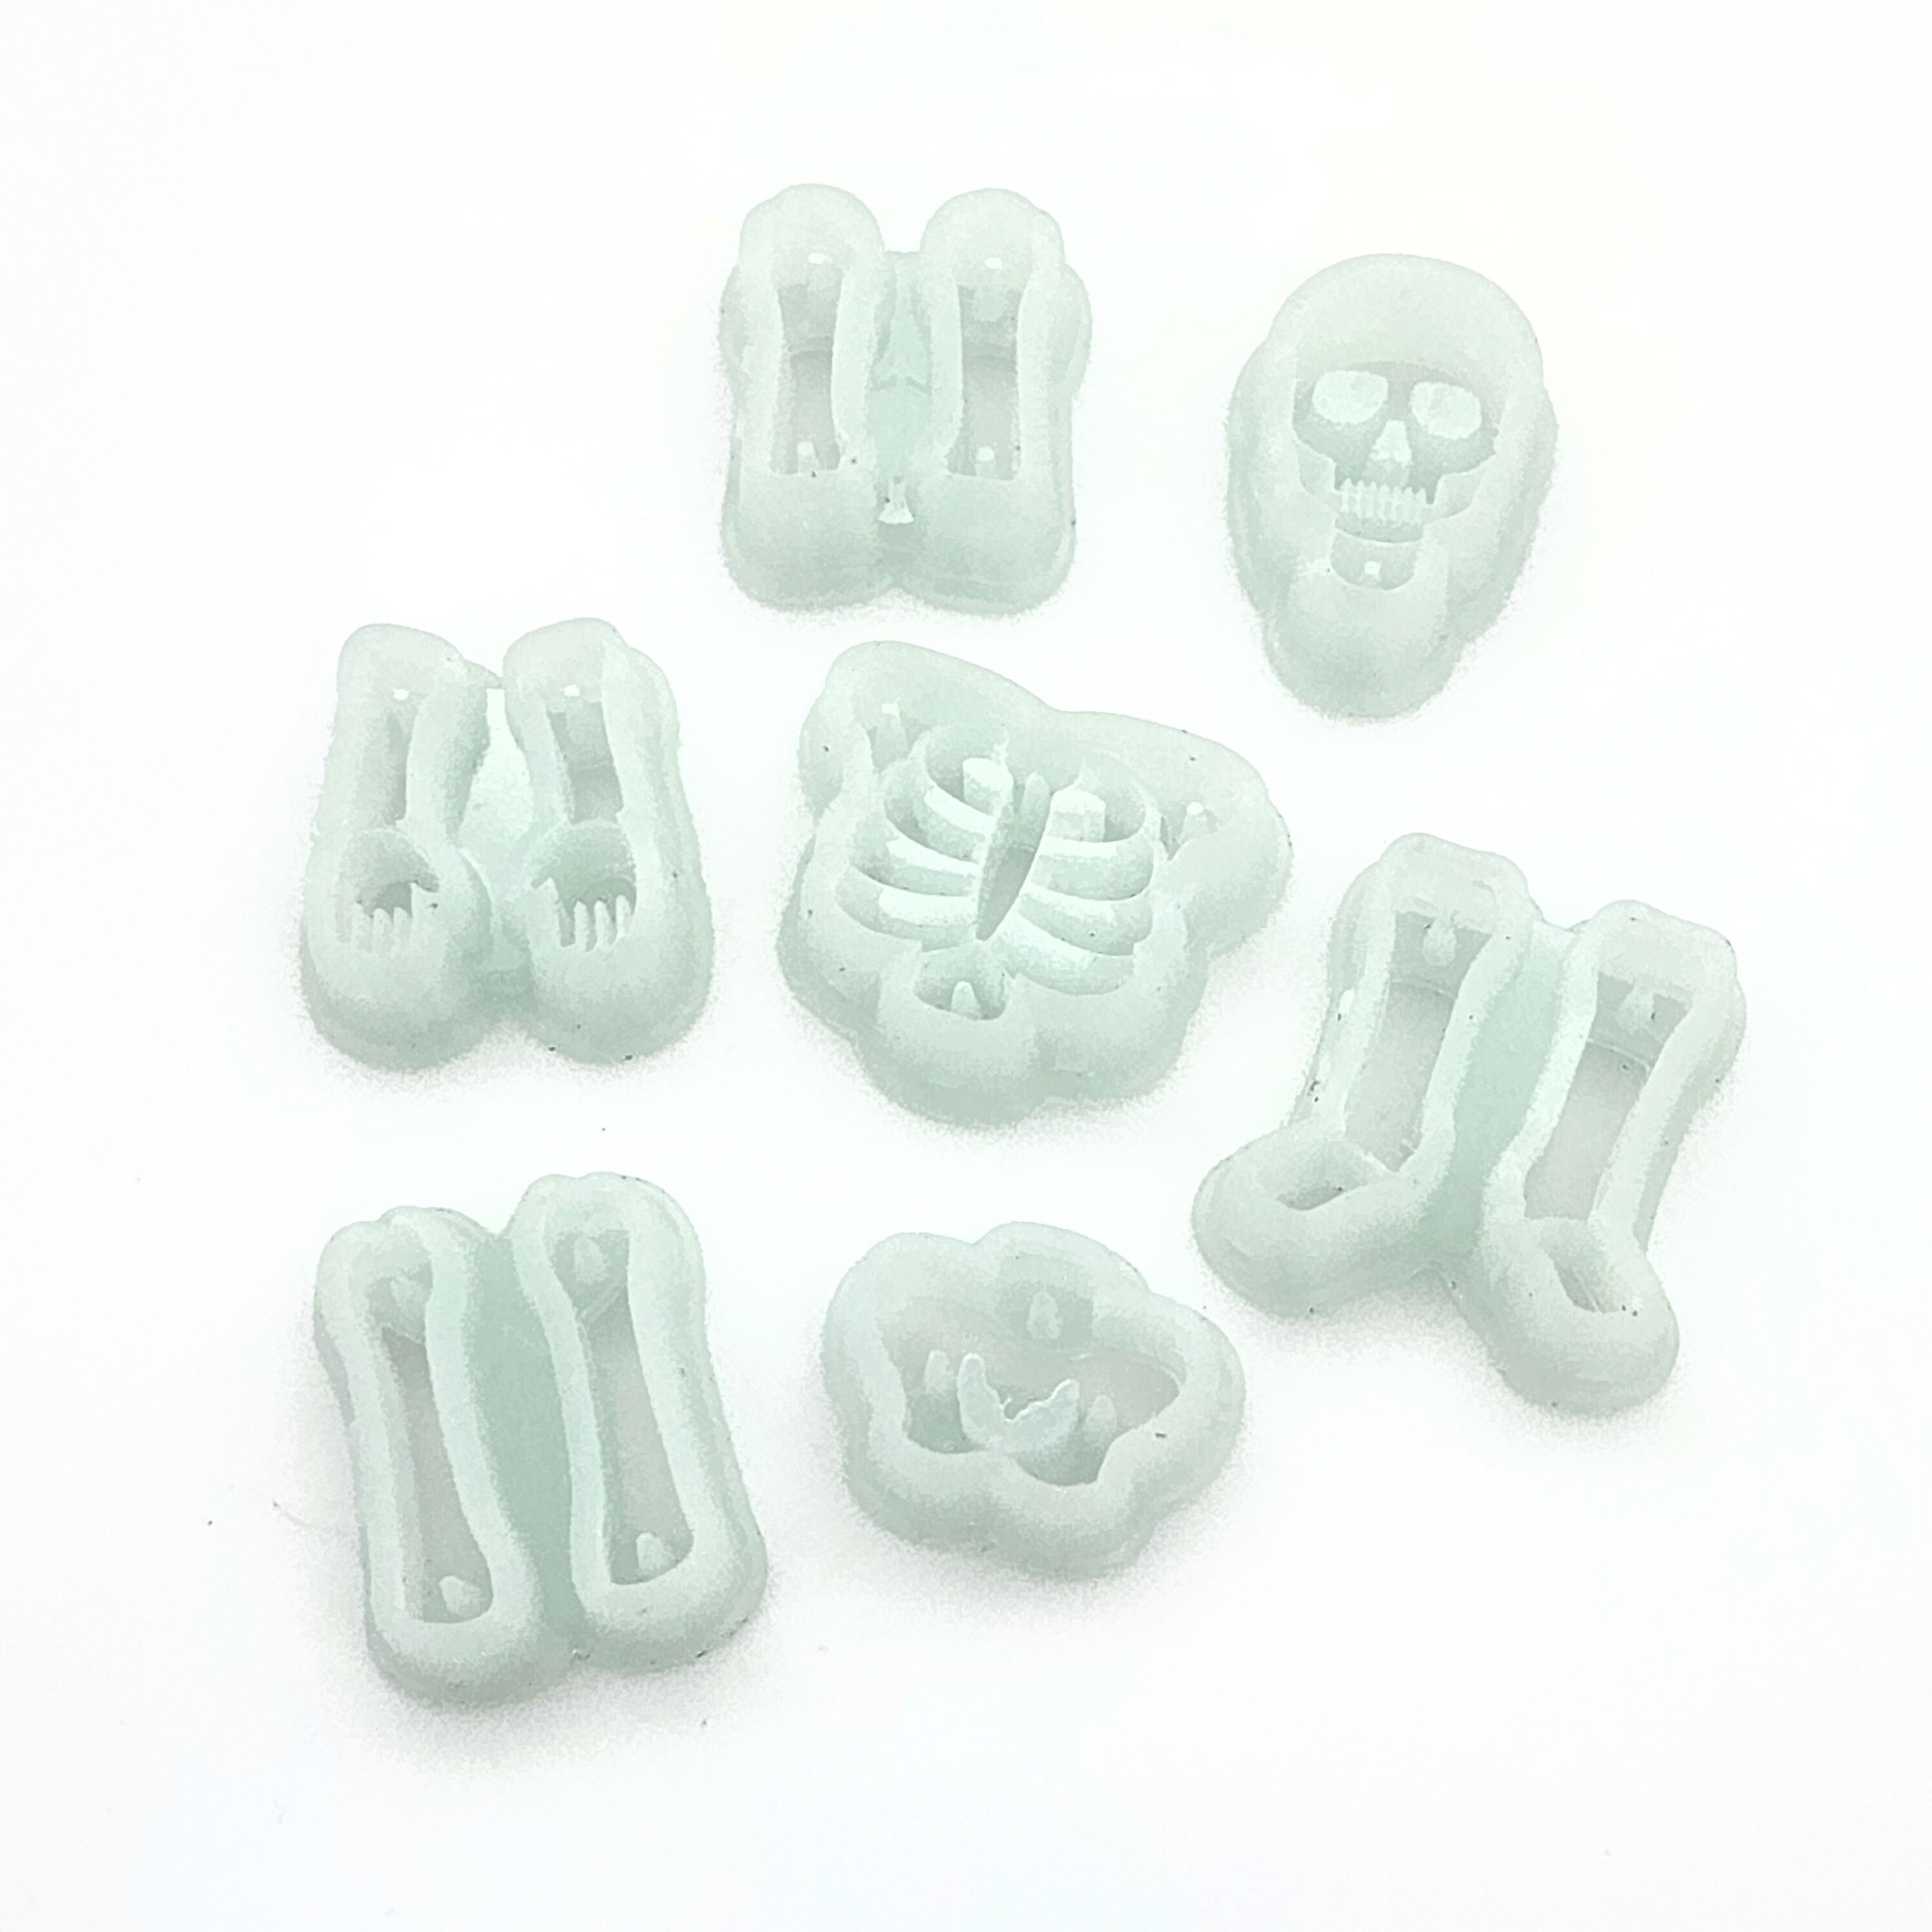 Skull Polymer Clay Cutters  Sharp, Clean, Precise Cuts Every Time